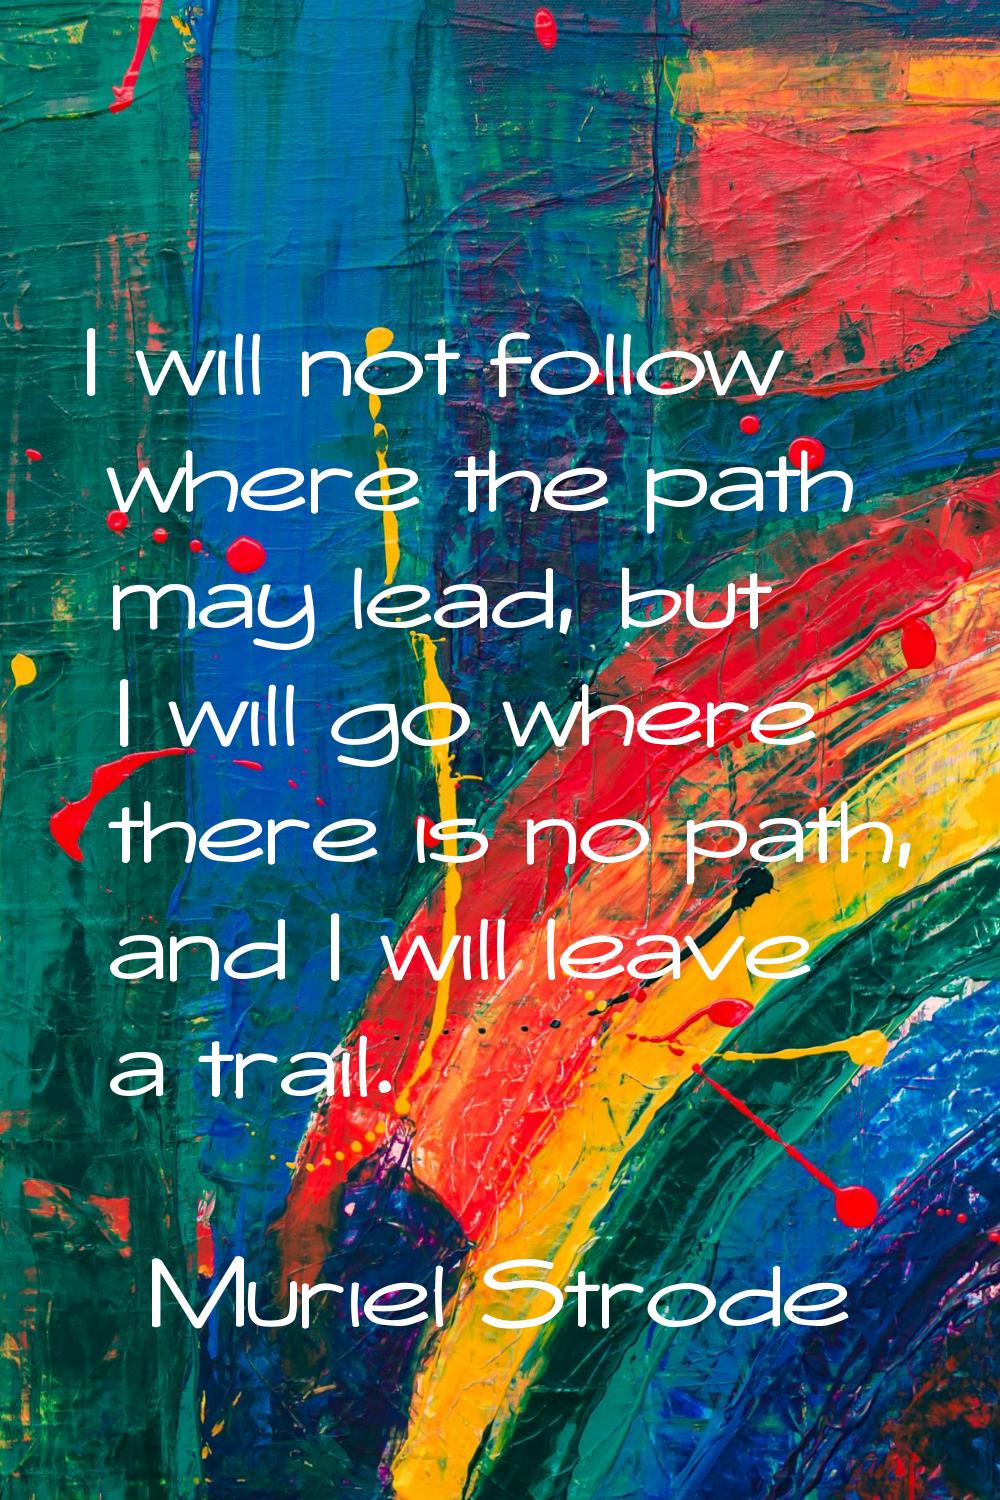 I will not follow where the path may lead, but I will go where there is no path, and I will leave a